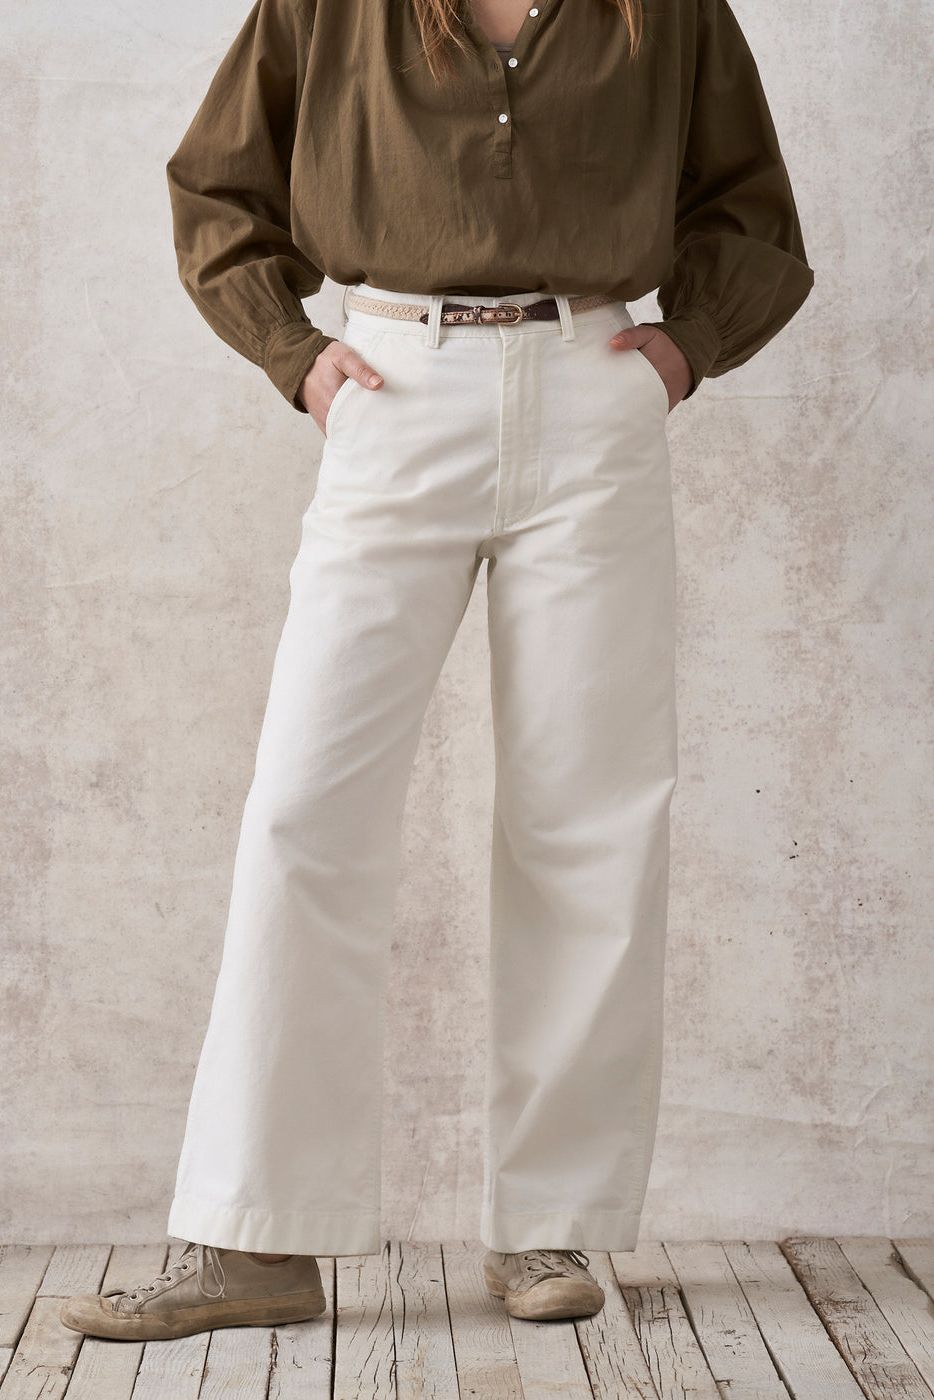 Zara Pink High Waist Belted Pants  Belted pants, Buckle pants, Clothes  design